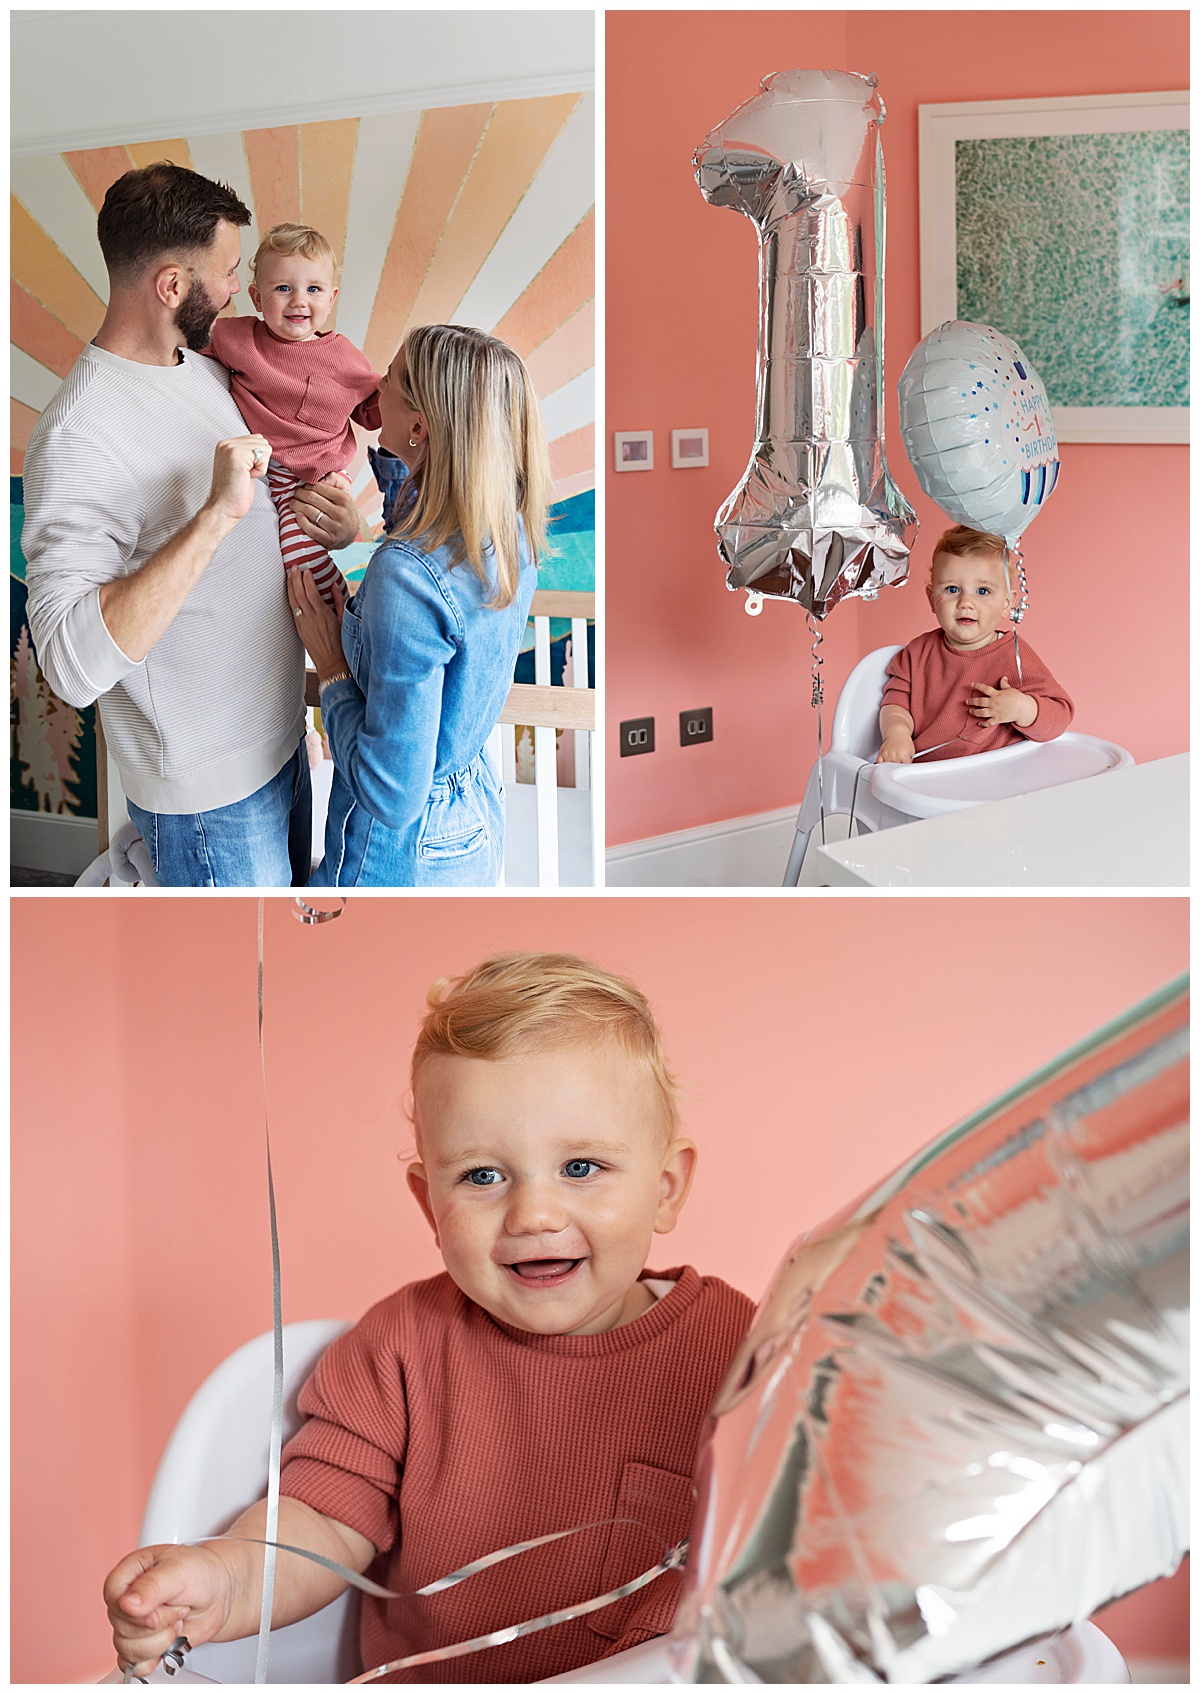 A young child holding a number one party balloon as he poses for his first birthday photo shoot